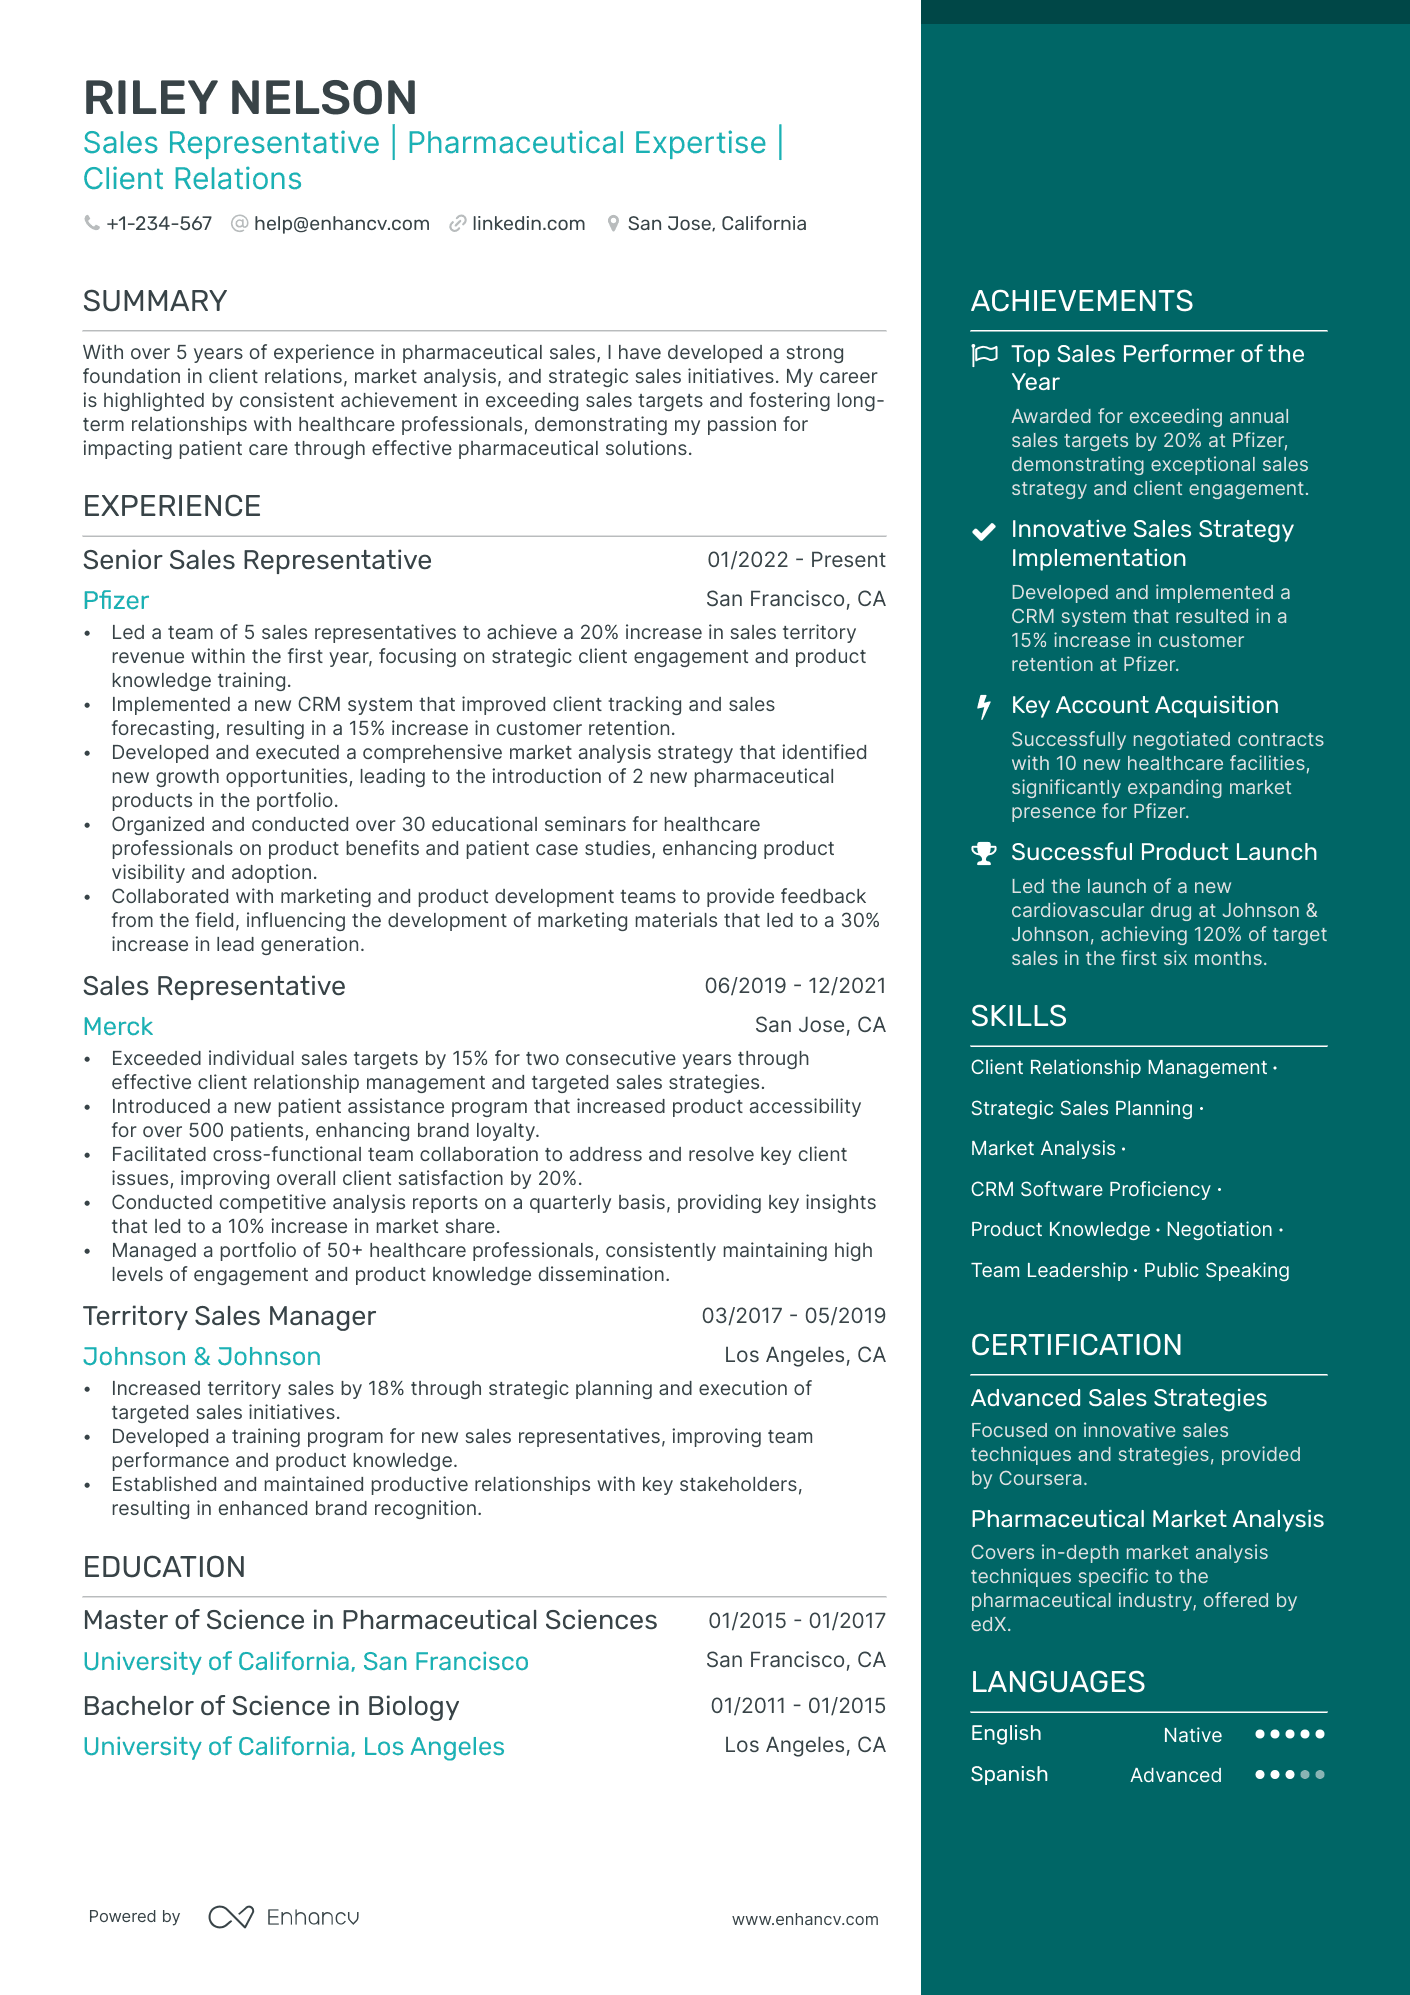 Sales Representative | Pharmaceutical Expertise | Client Relations resume example